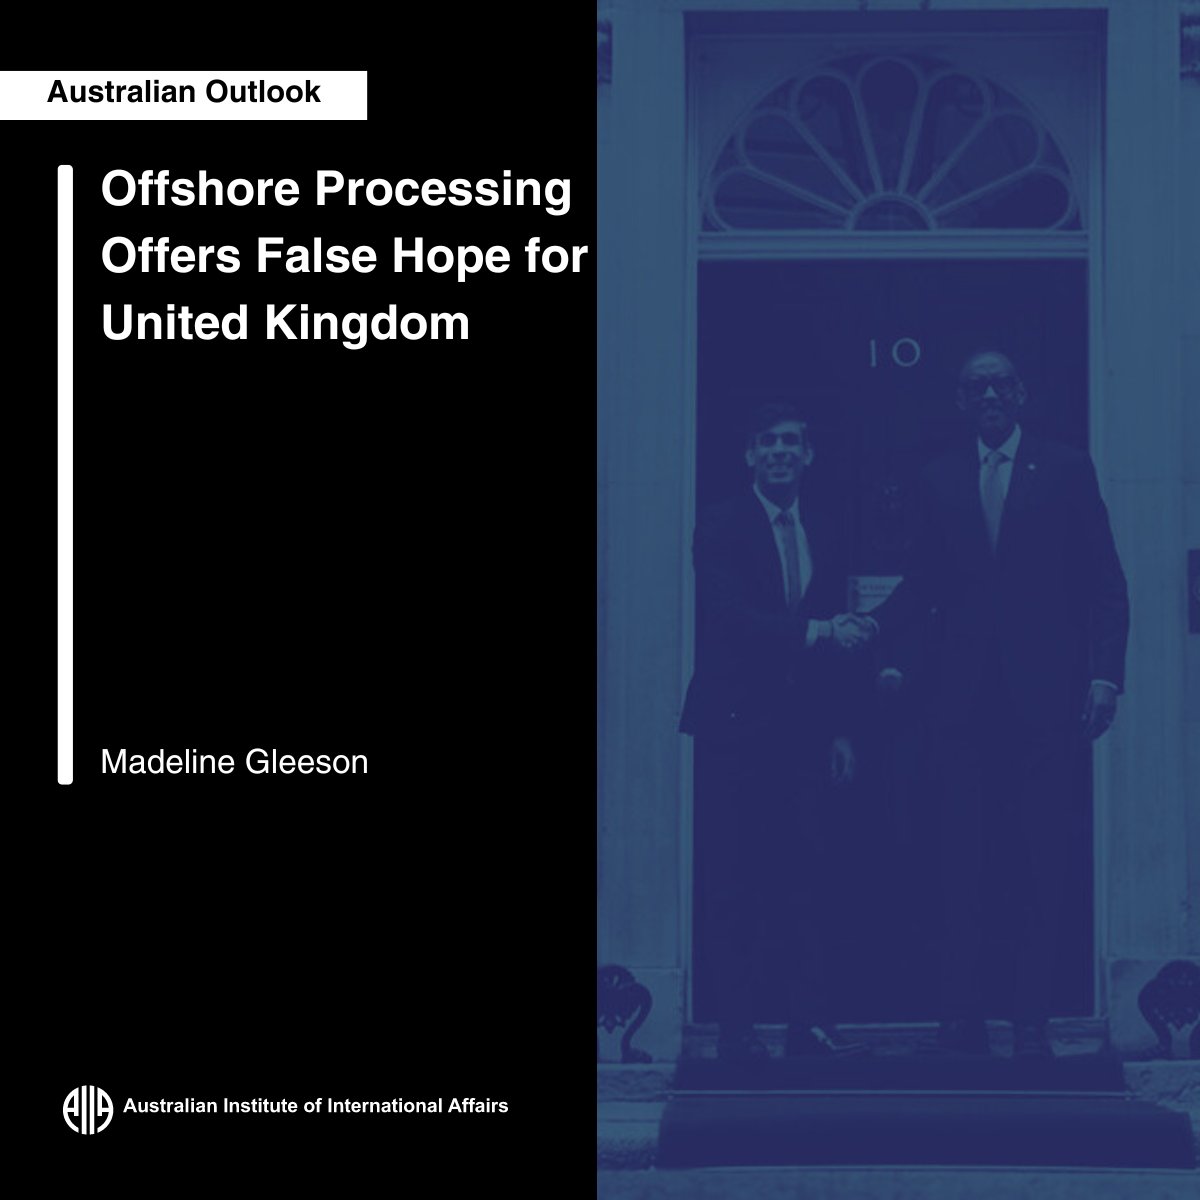 “The influence of Australia’s deterrence-based asylum policy is spreading across Europe and the United Kingdom, with serious consequences for both human rights and the rule of law,” discussed by Madeline Gleeson Read more at Australian Outlook👇 ow.ly/M8nm50RmOBU